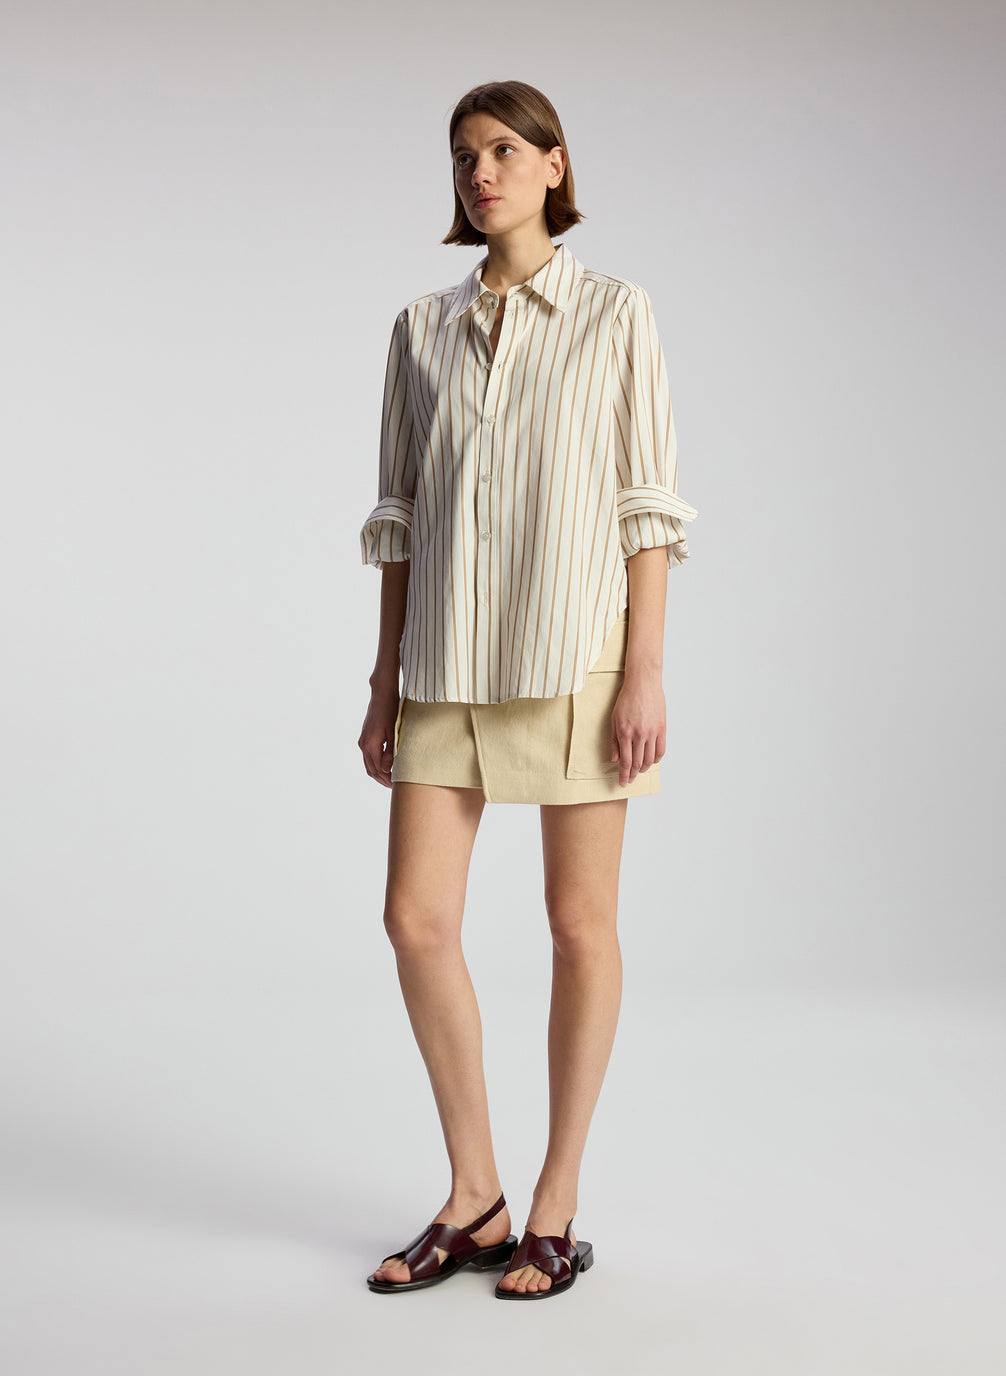 side view of woman wearing brown and white striped shirt and beige mini skirt